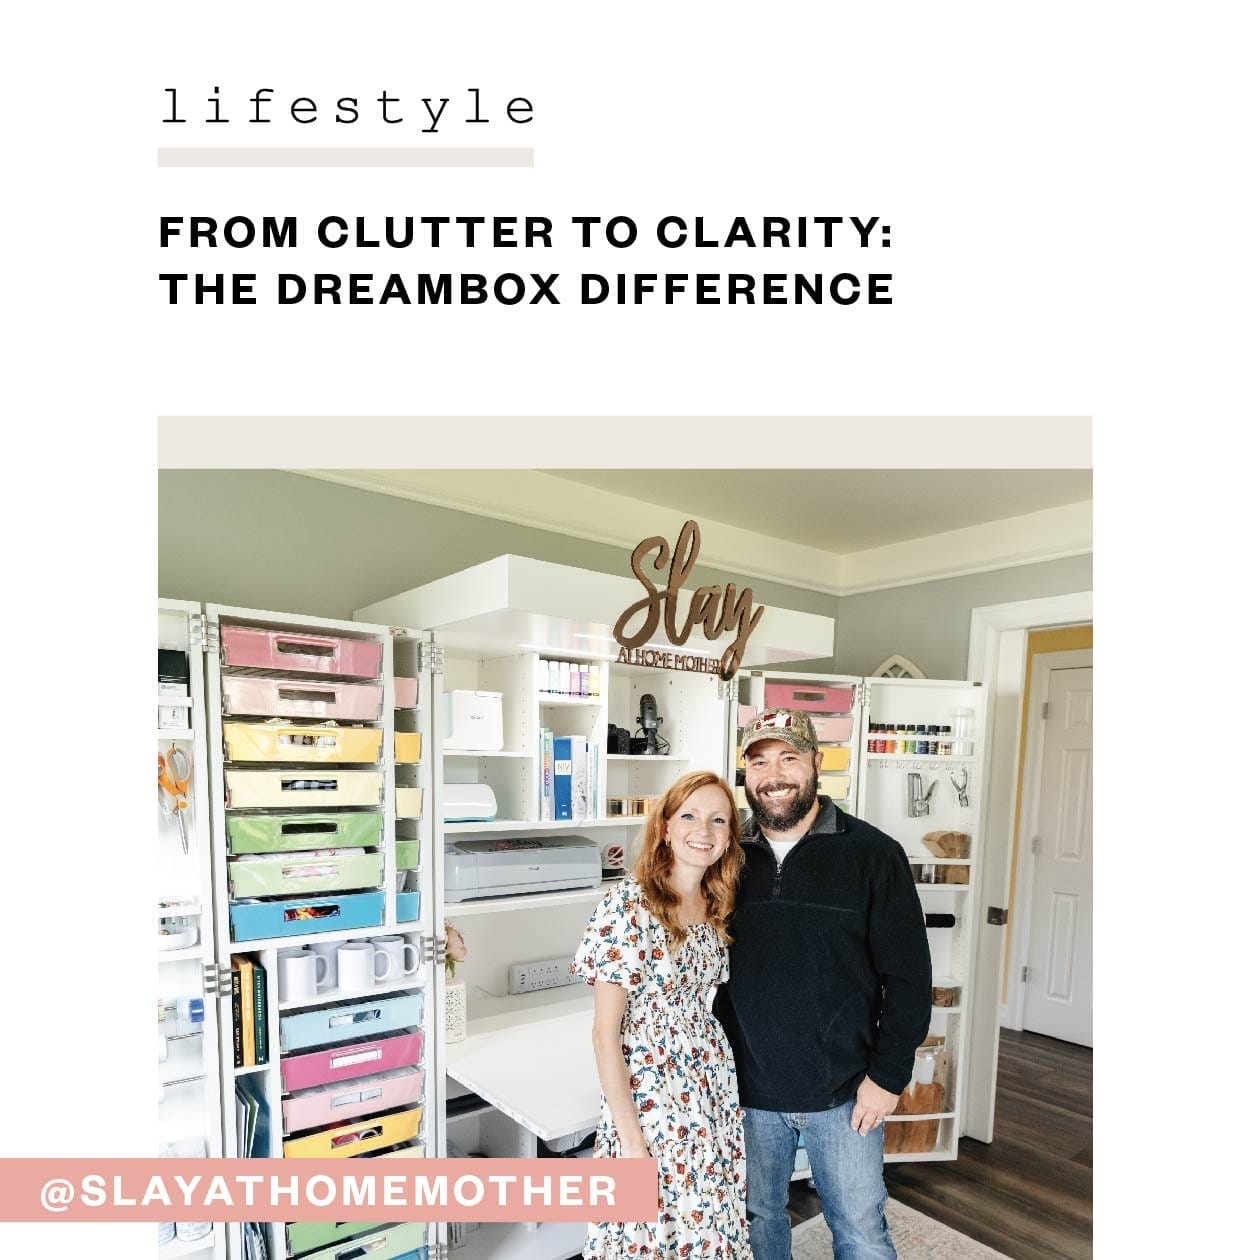 Lifestyle: From Clutter to Clarity: The DreamBox Difference